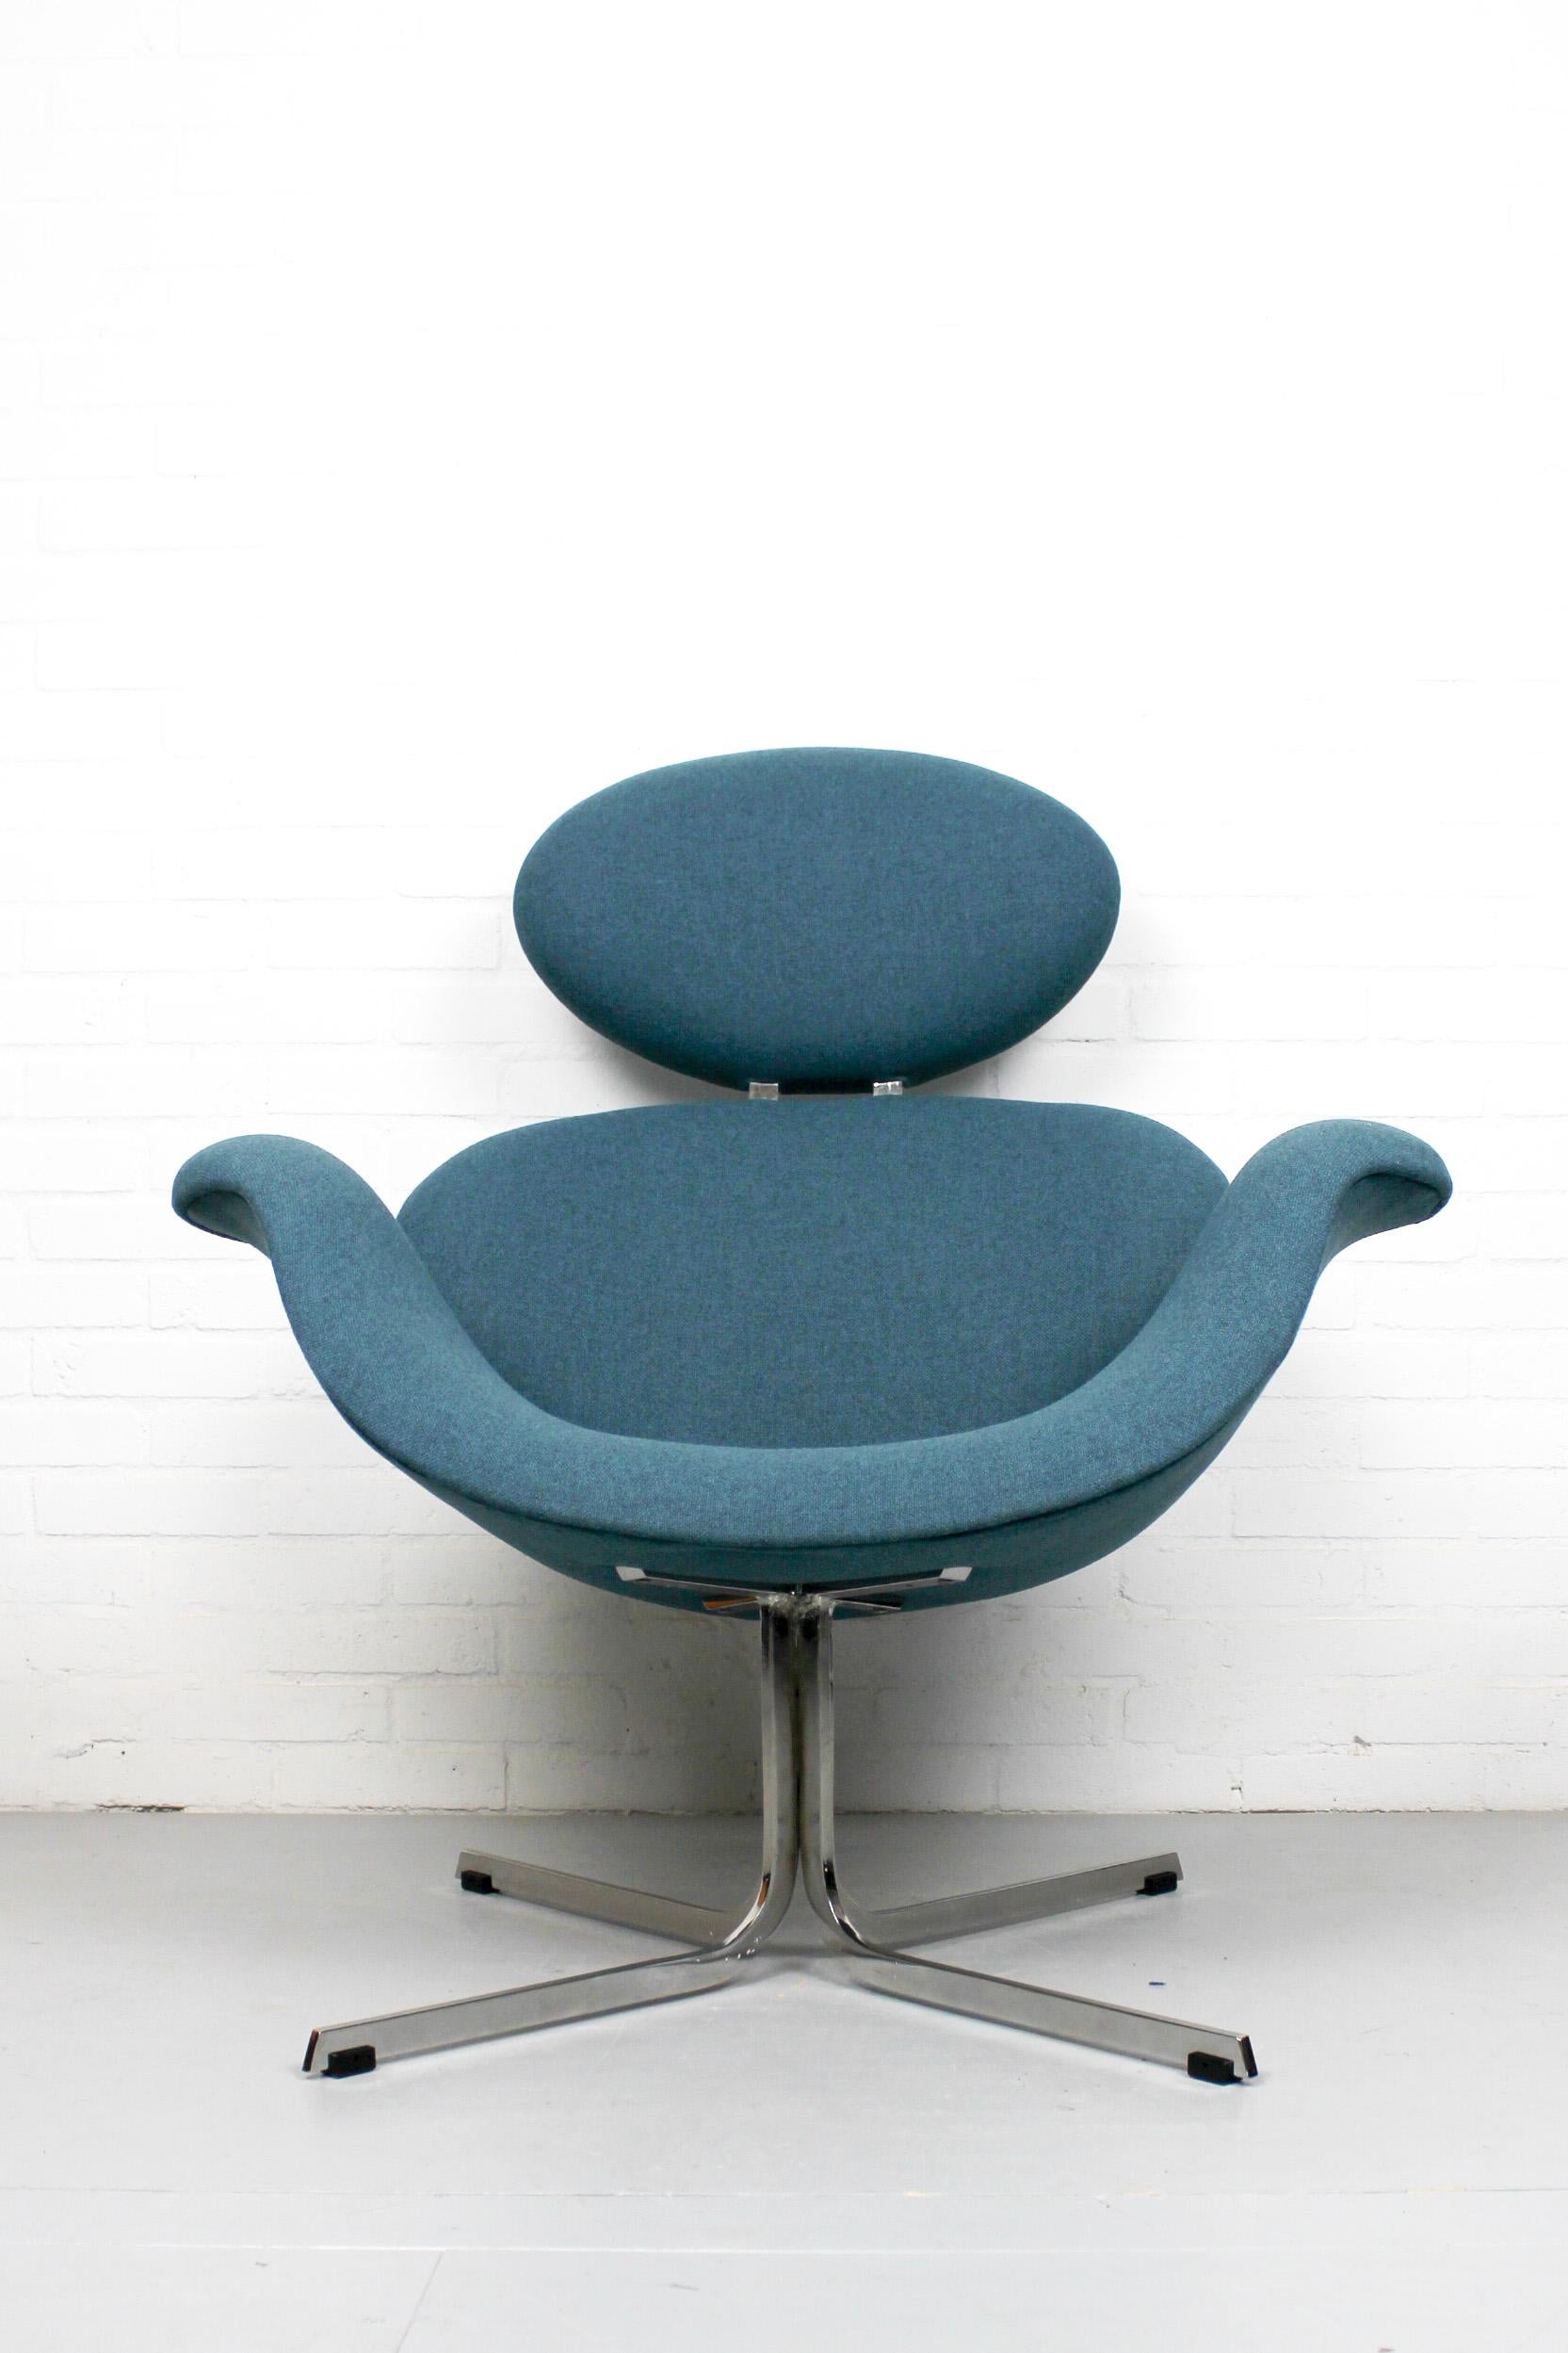 Big Tulip designed by Pierre Paulin for Artifort. This chair is a first edition of the Big Tulip. It has a chrome-plated frame and a rount top part for the head. The chair is completely restored with new upholstery Kvadrat Tonica (no 831).